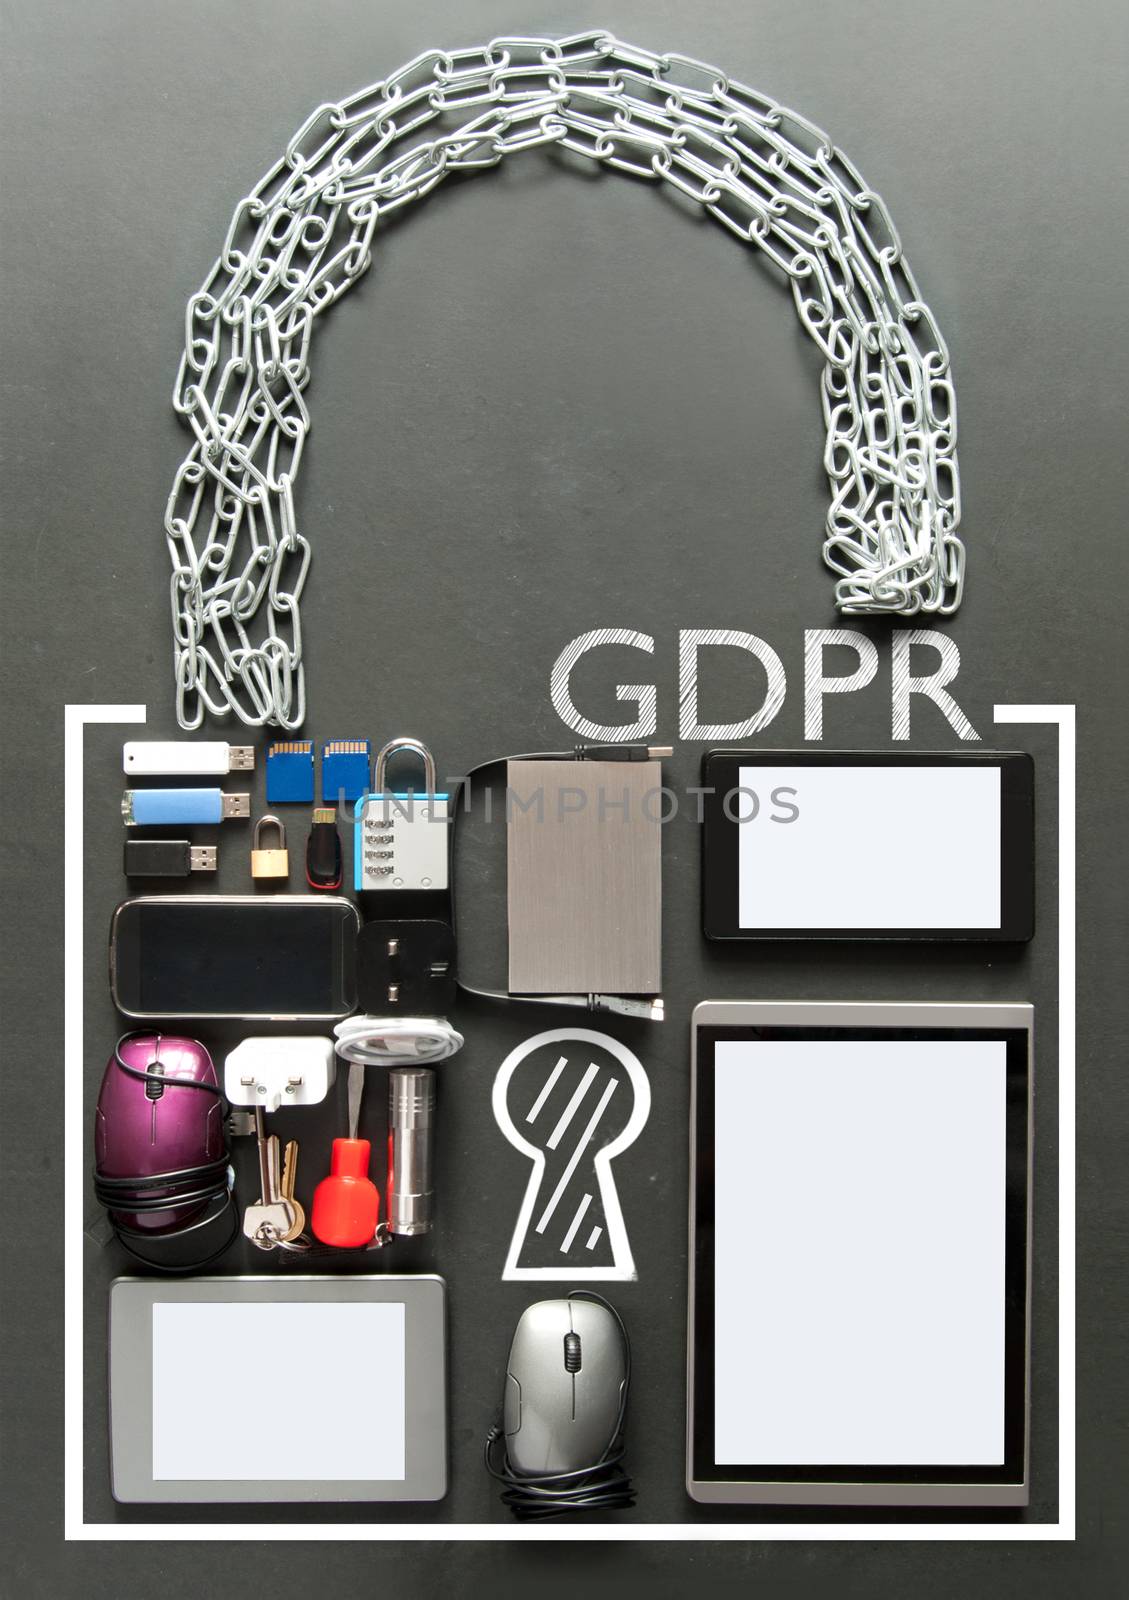 GDPR handwritten inside a padlock made from various devices including tablets, computer mouse, usb cards